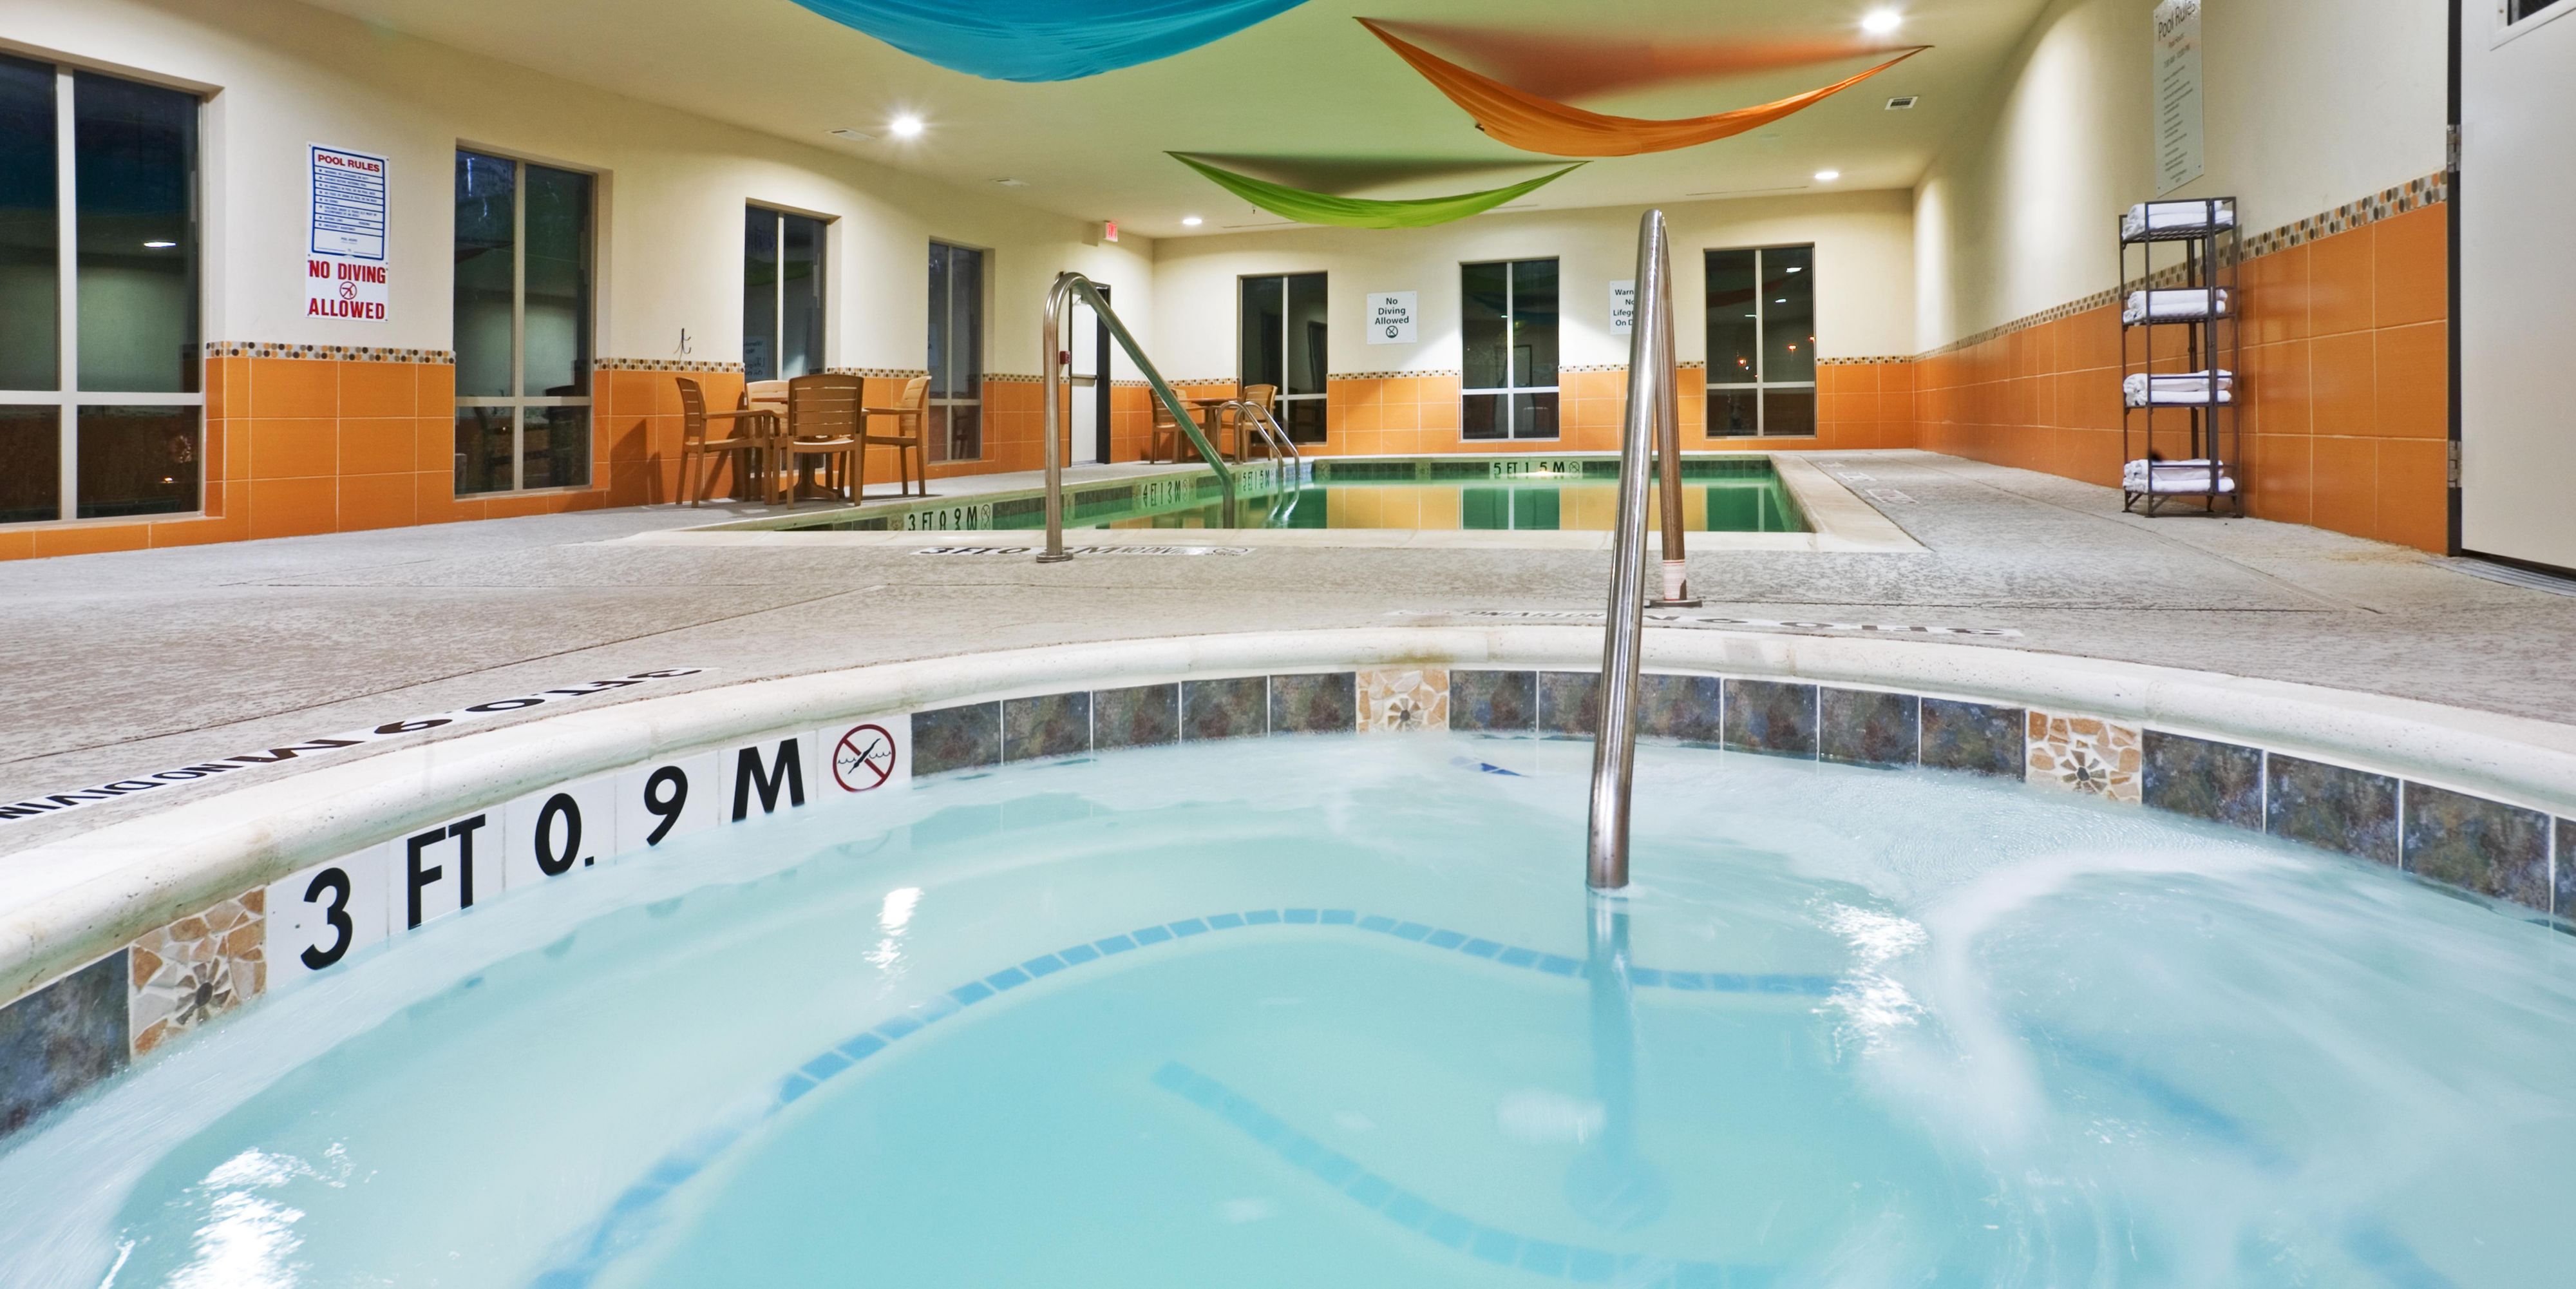 Take a refreshing dip in our indoor swimming pool and relax in the whirlpool. The pool is open daily from 7 a.m. - 10 p.m.